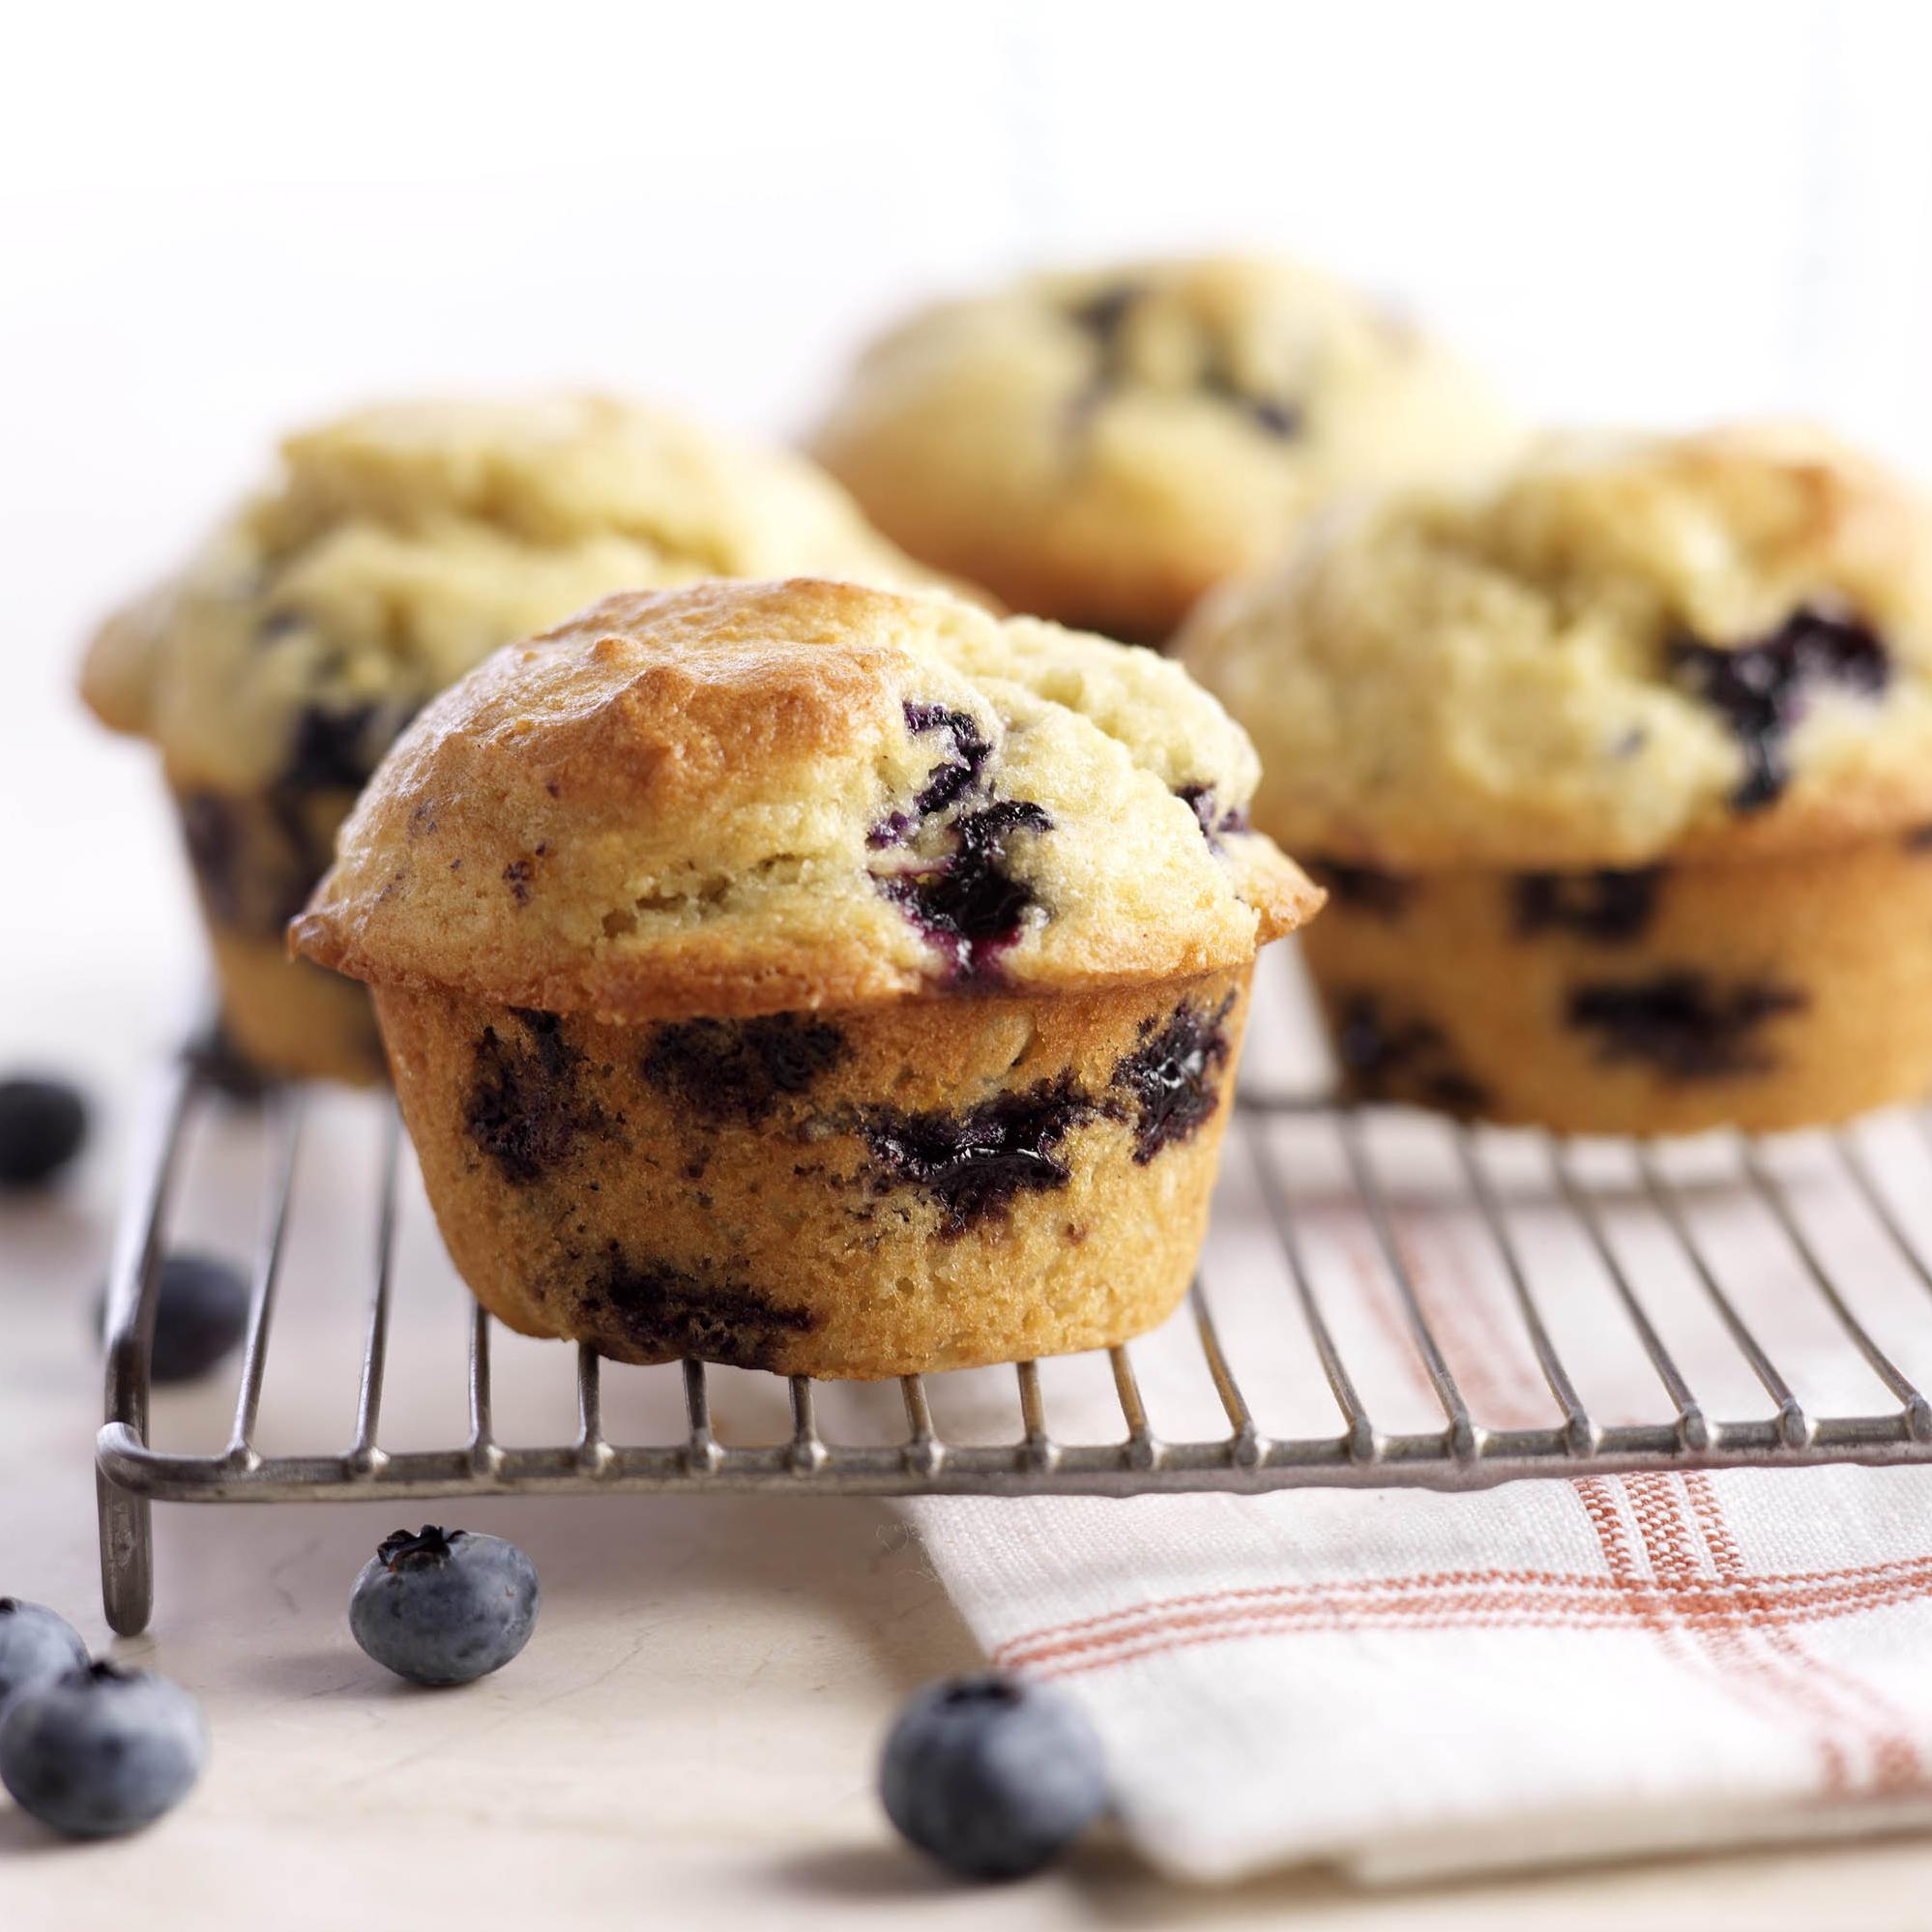  The smell of freshly baked blueberry muffins never gets old!